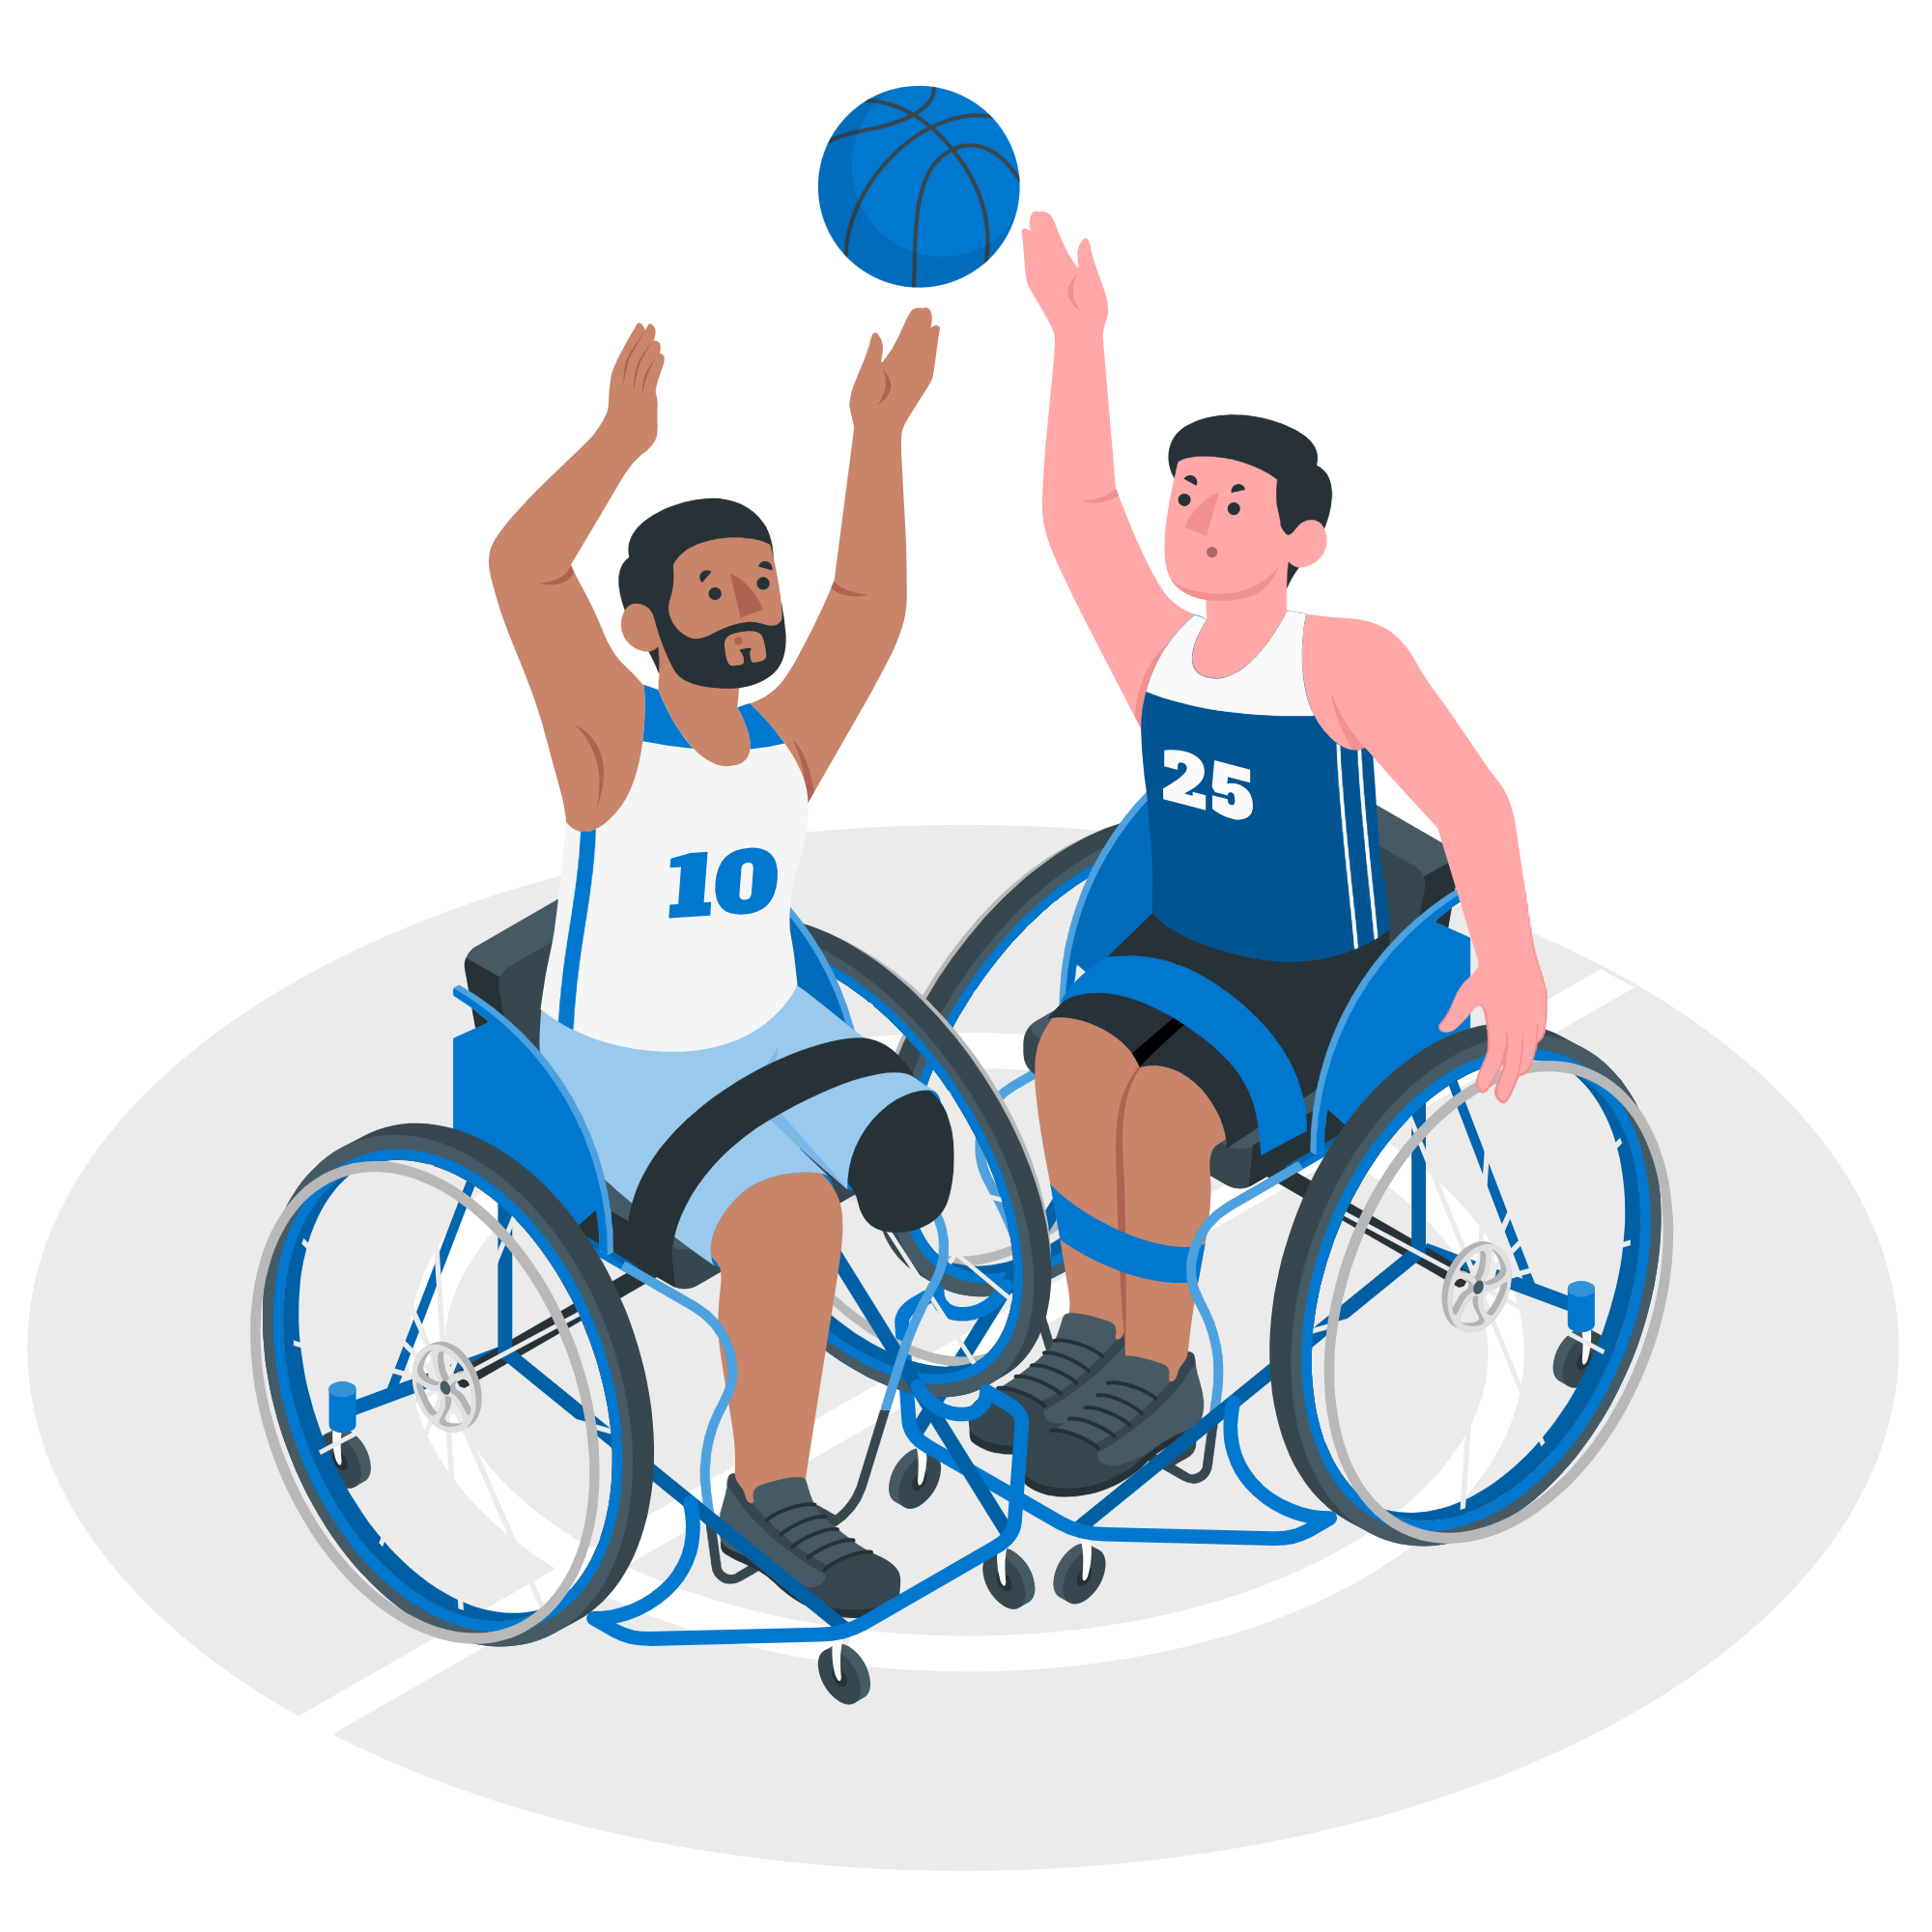 Two players competing in wheelchair basketball